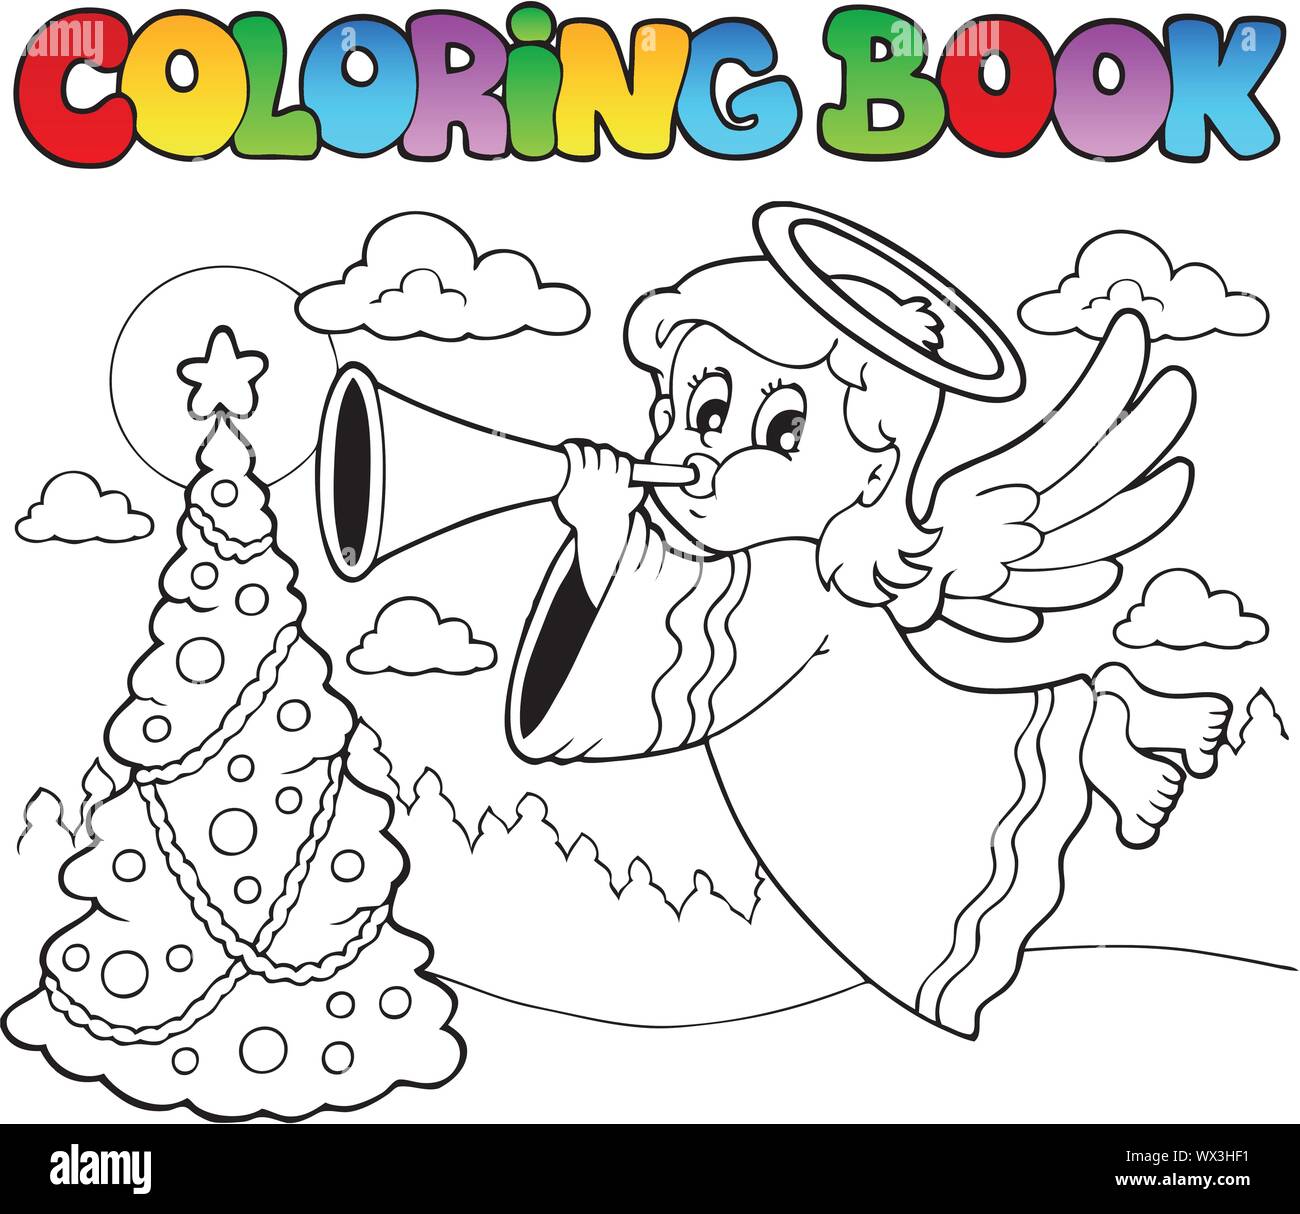 Coloring book image with angel 2 Stock Vector